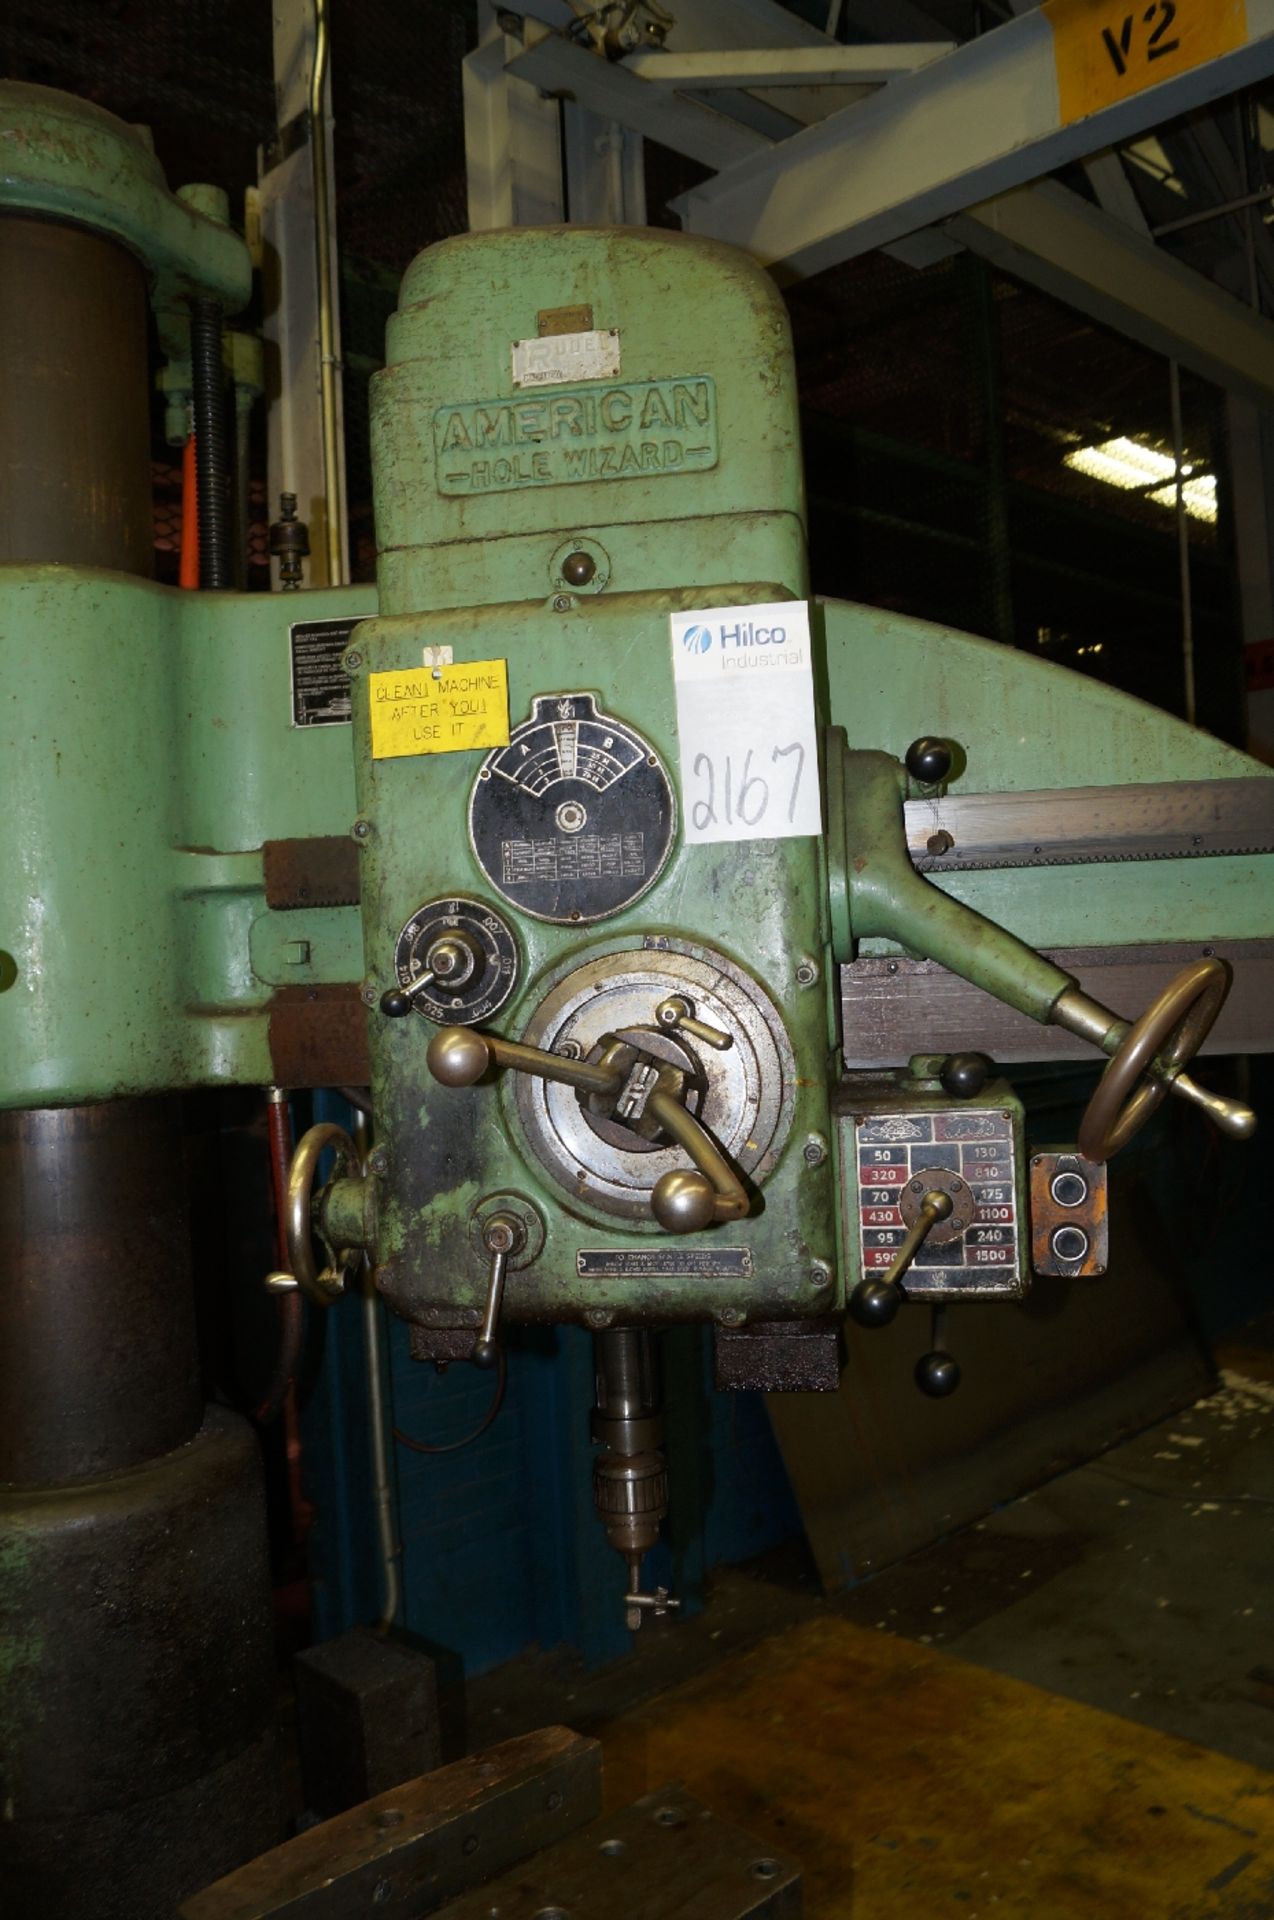 American Hole Wizard Radial Arm Drill ; 18" x 24" x 12" Table, with 16-1/4" Machine Vise, BT - Image 2 of 3